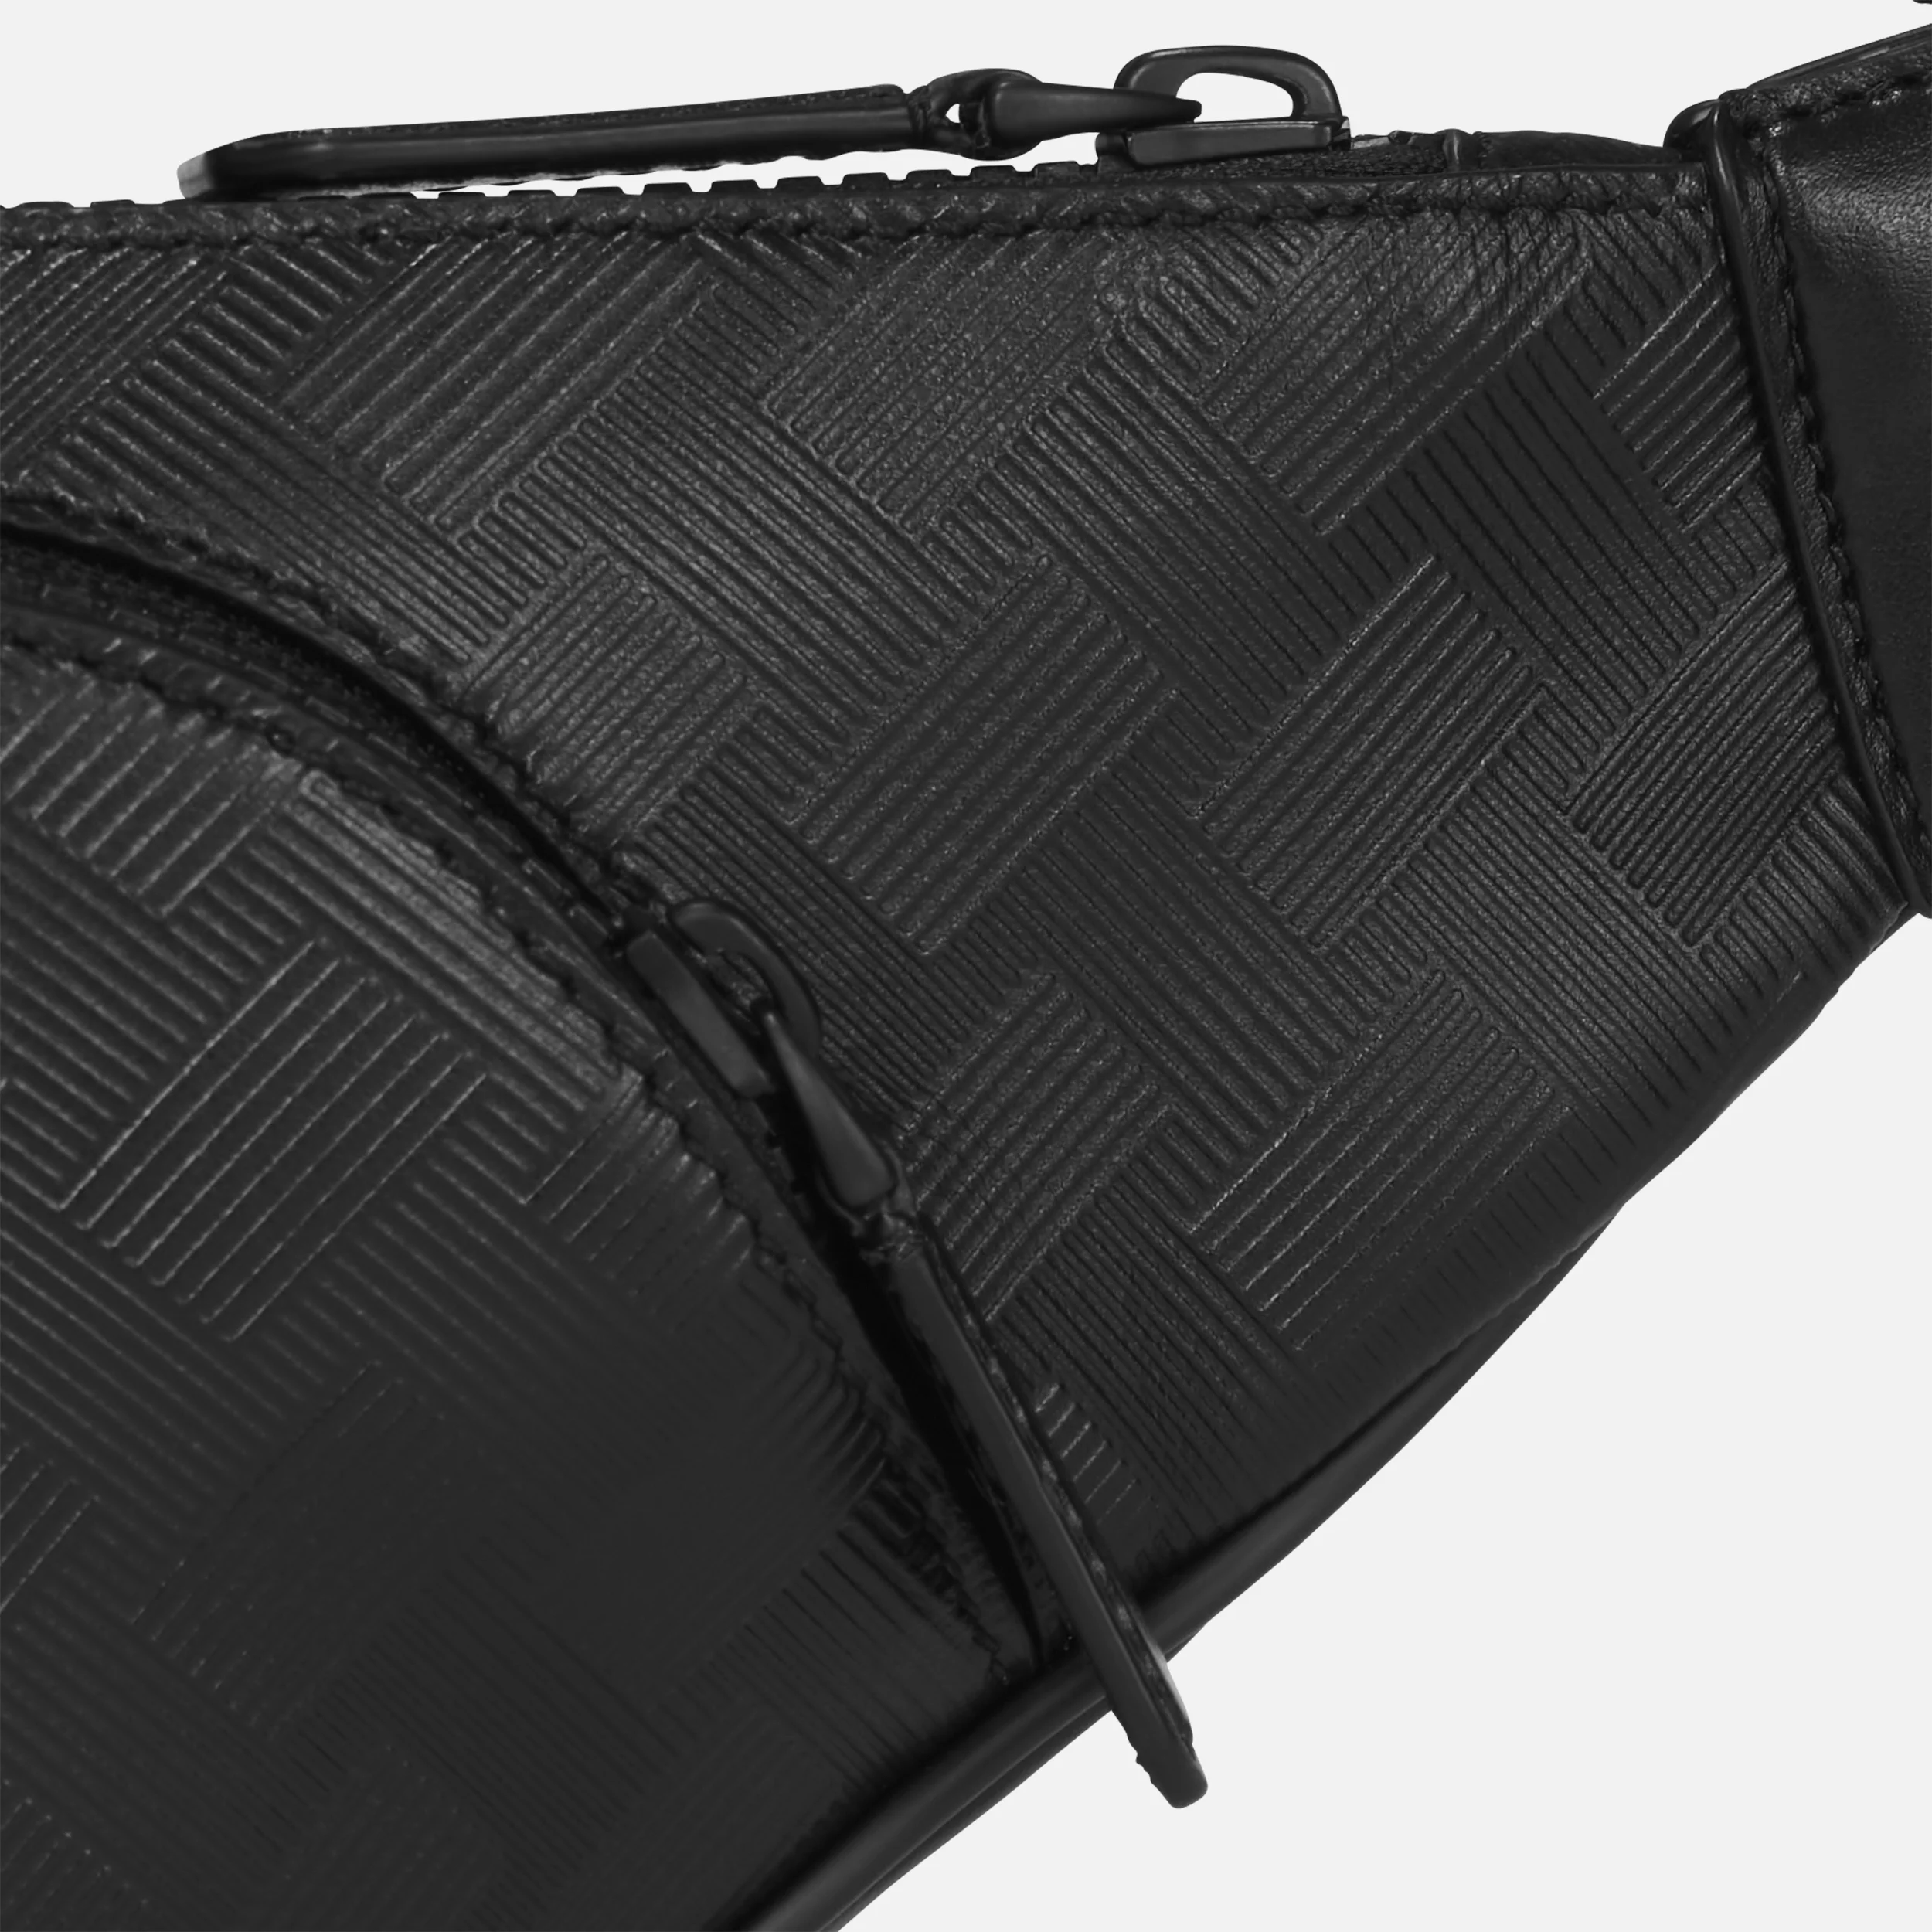 MONTBLANC EXTREME 3.0 CHEST BAG - Pencraft the boutique